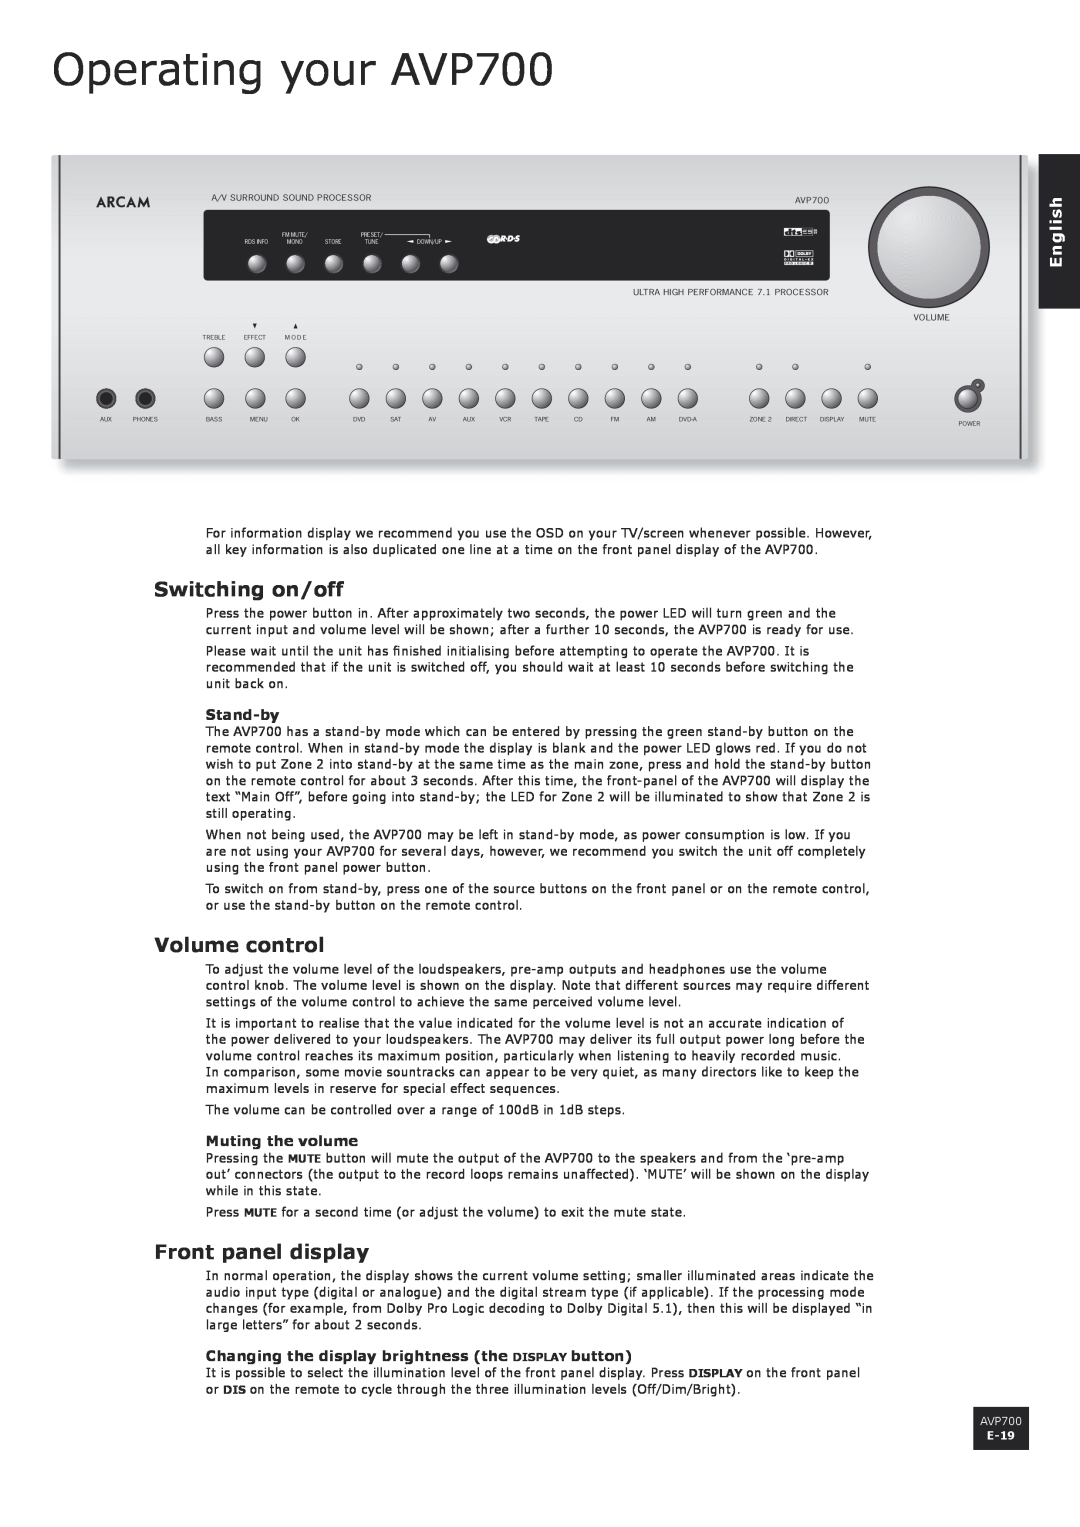 Arcam manual Operating your AVP700, Switching on/off, Volume control, Front panel display, Stand-by, Muting the volume 